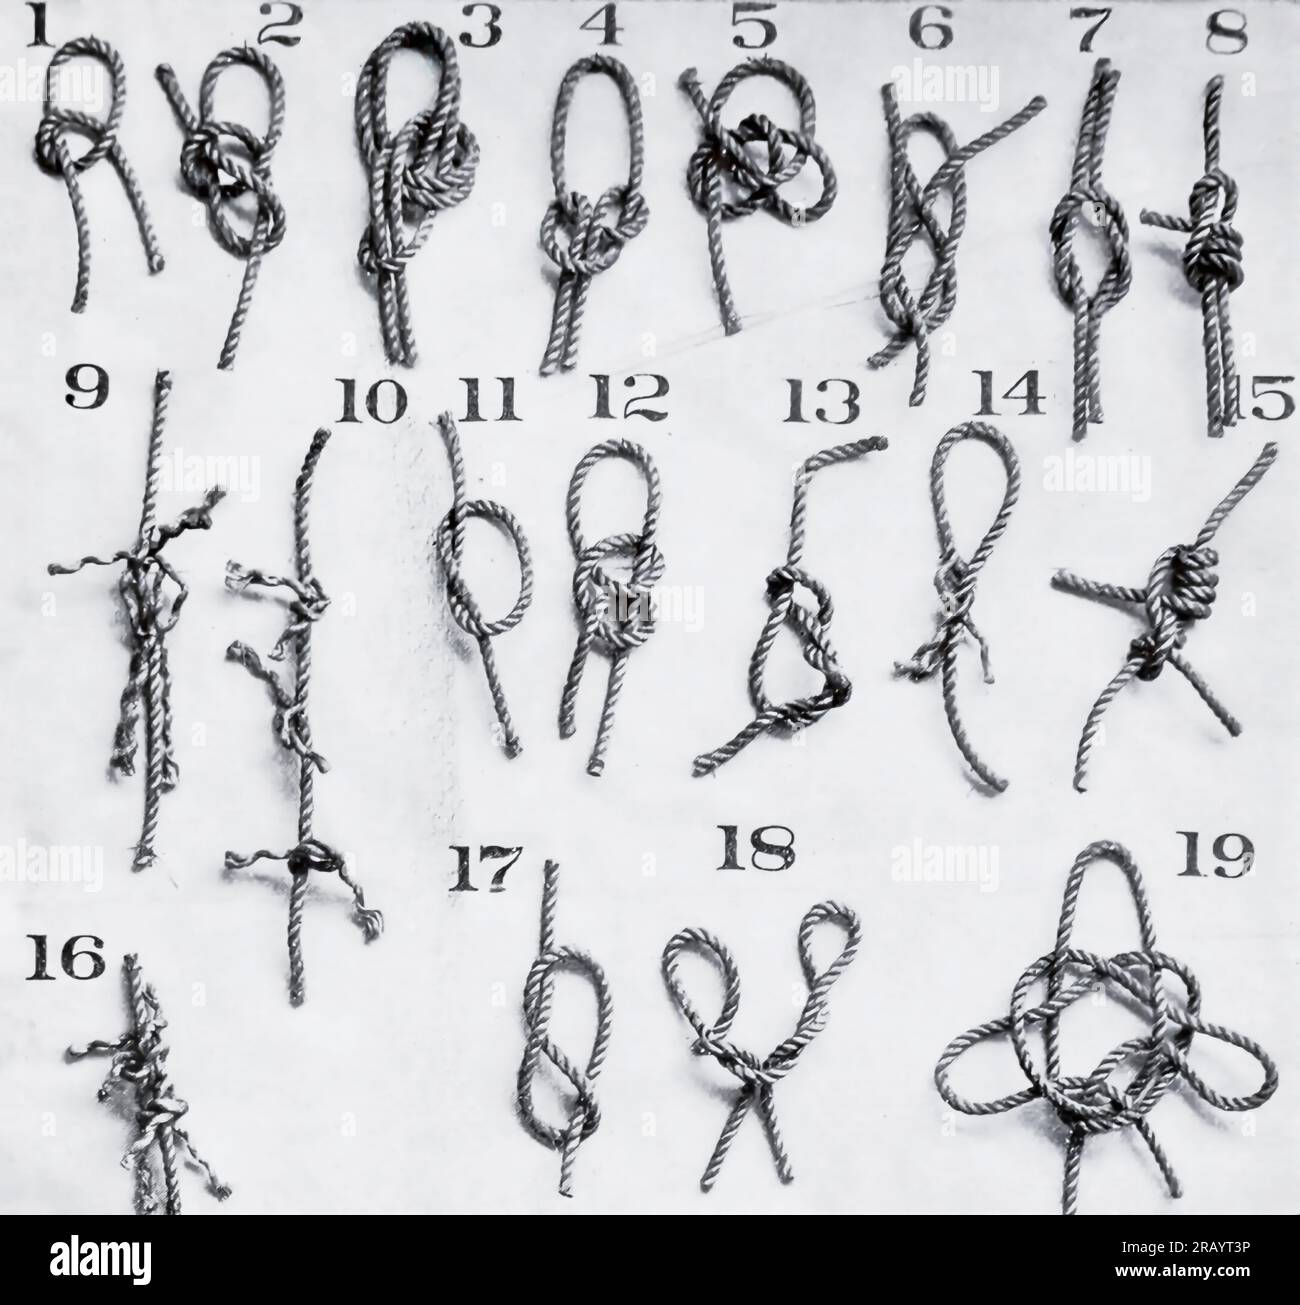 Some Knots used in Wrecking 1 — Commencement of a bowline. 2 -Single bowline, 3- Double bowline on a bight. 4 — Single bowline on a bight. 5 — Running bowline. 6— Double Garrick bend. 7 — Flat knot. 8— Fisherman's bend. 9 — Short splice. 10 — Long splice. 11— Overhand knot. 12 — Two half hitches. 13— Timber hitch. 14- Eye spliced in end of line. 15— Stopper on line. 16— Shroud knot used for putting two lines together when end is short. 17 — Figure 8. 18— Cats-paw. 19 — Mast-head knot. The Engineering Magazine DEVOTED TO INDUSTRIAL PROGRESS Volume X October 1896 NEW YORK The Engineering Magazin Stock Photo